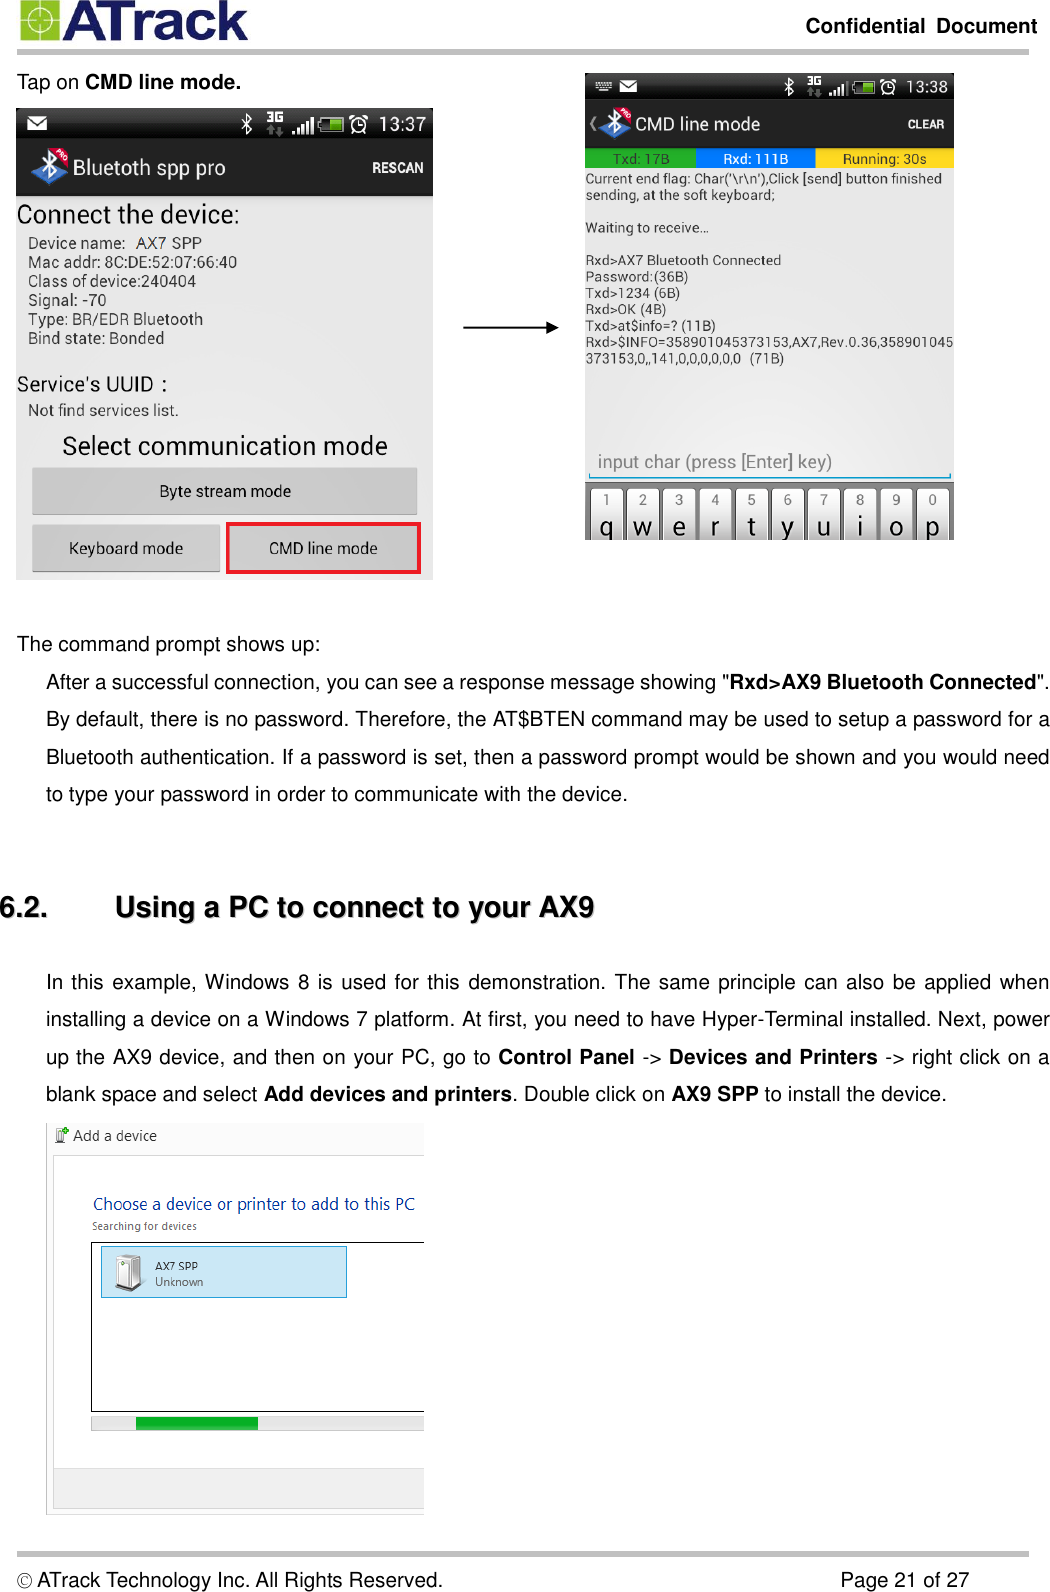         Confidential  Document  © ATrack Technology Inc. All Rights Reserved.                                                                            Page 21 of 27 Tap on CMD line mode.   The command prompt shows up:  After a successful connection, you can see a response message showing &quot;Rxd&gt;AX9 Bluetooth Connected&quot;. By default, there is no password. Therefore, the AT$BTEN command may be used to setup a password for a Bluetooth authentication. If a password is set, then a password prompt would be shown and you would need to type your password in order to communicate with the device.    66..22..  UUssiinngg  aa  PPCC  ttoo  ccoonnnneecctt  ttoo  yyoouurr  AAXX99  In this example, Windows 8 is used for this demonstration. The same principle can also be applied when installing a device on a Windows 7 platform. At first, you need to have Hyper-Terminal installed. Next, power up the AX9 device, and then on your PC, go to Control Panel -&gt; Devices and Printers -&gt; right click on a blank space and select Add devices and printers. Double click on AX9 SPP to install the device.    